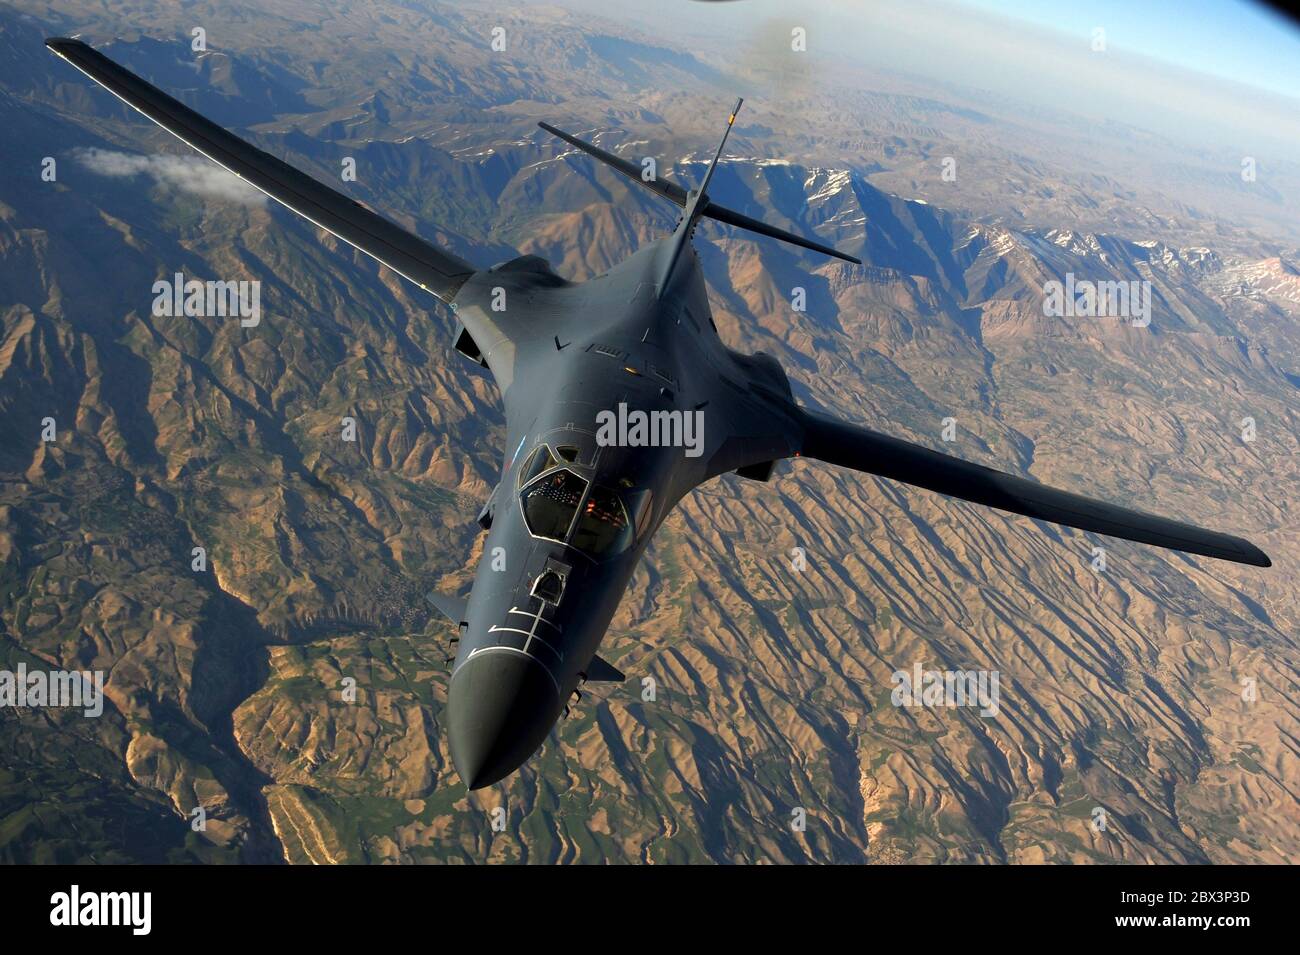 A U.S. Air Force B-1B Lancer stealth bomber aircraft from the 37th Expeditionary Bomb Squadron, of the 28th Bomb Wing, returns to mission after refueling from a KC-135 Stratotanker aircraft in support of Operation Enduring Freedom March 29, 2011 over Afghanistan. Stock Photo